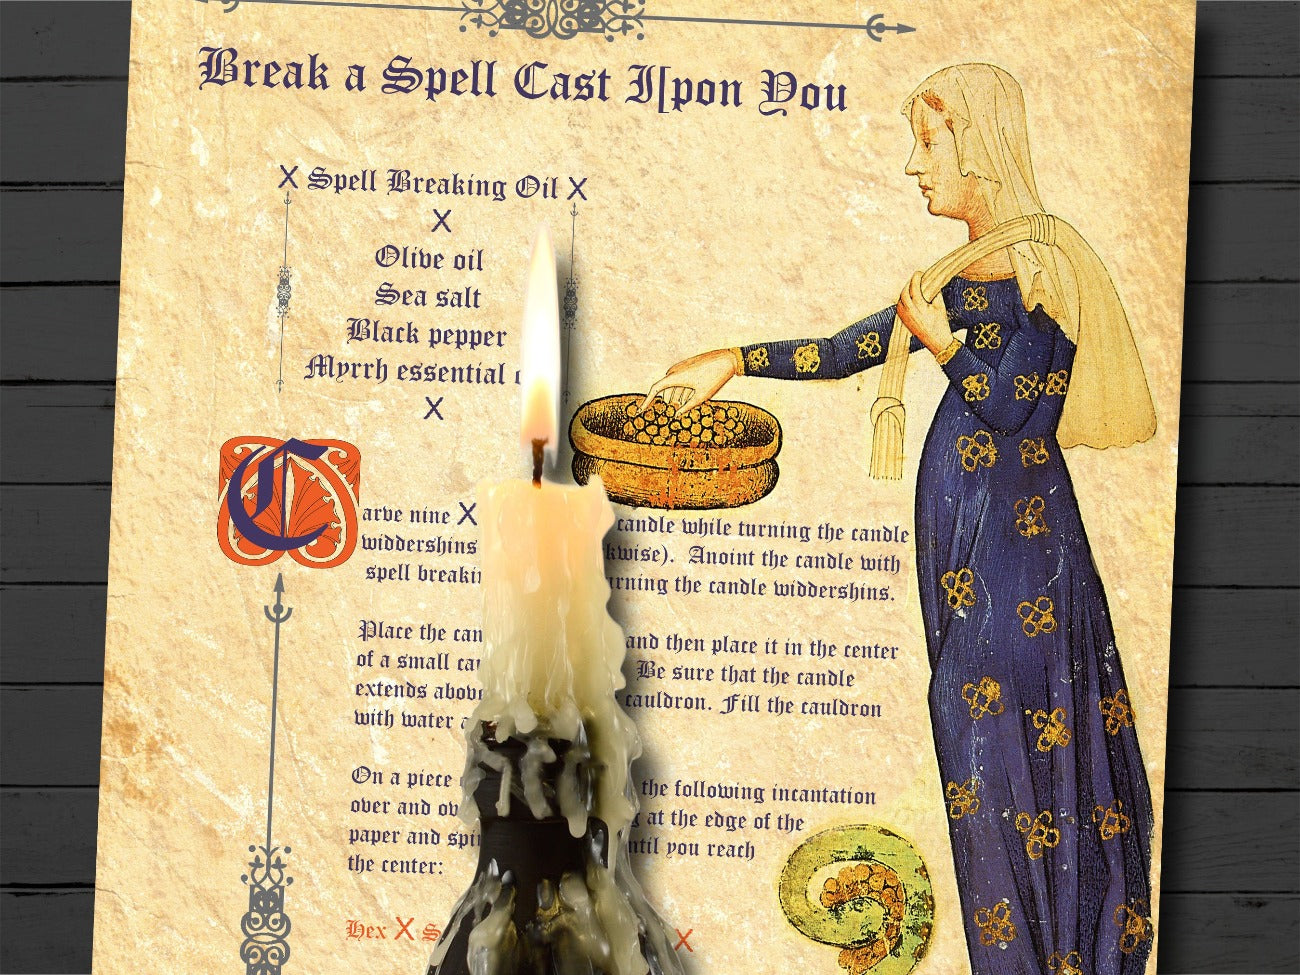 BREAK a SPELL Cast Upon You, Have you ever felt like someone has cursed or hexed you? Feeling under attack? This anti-hex spell will help. - Morgana Magick Spell